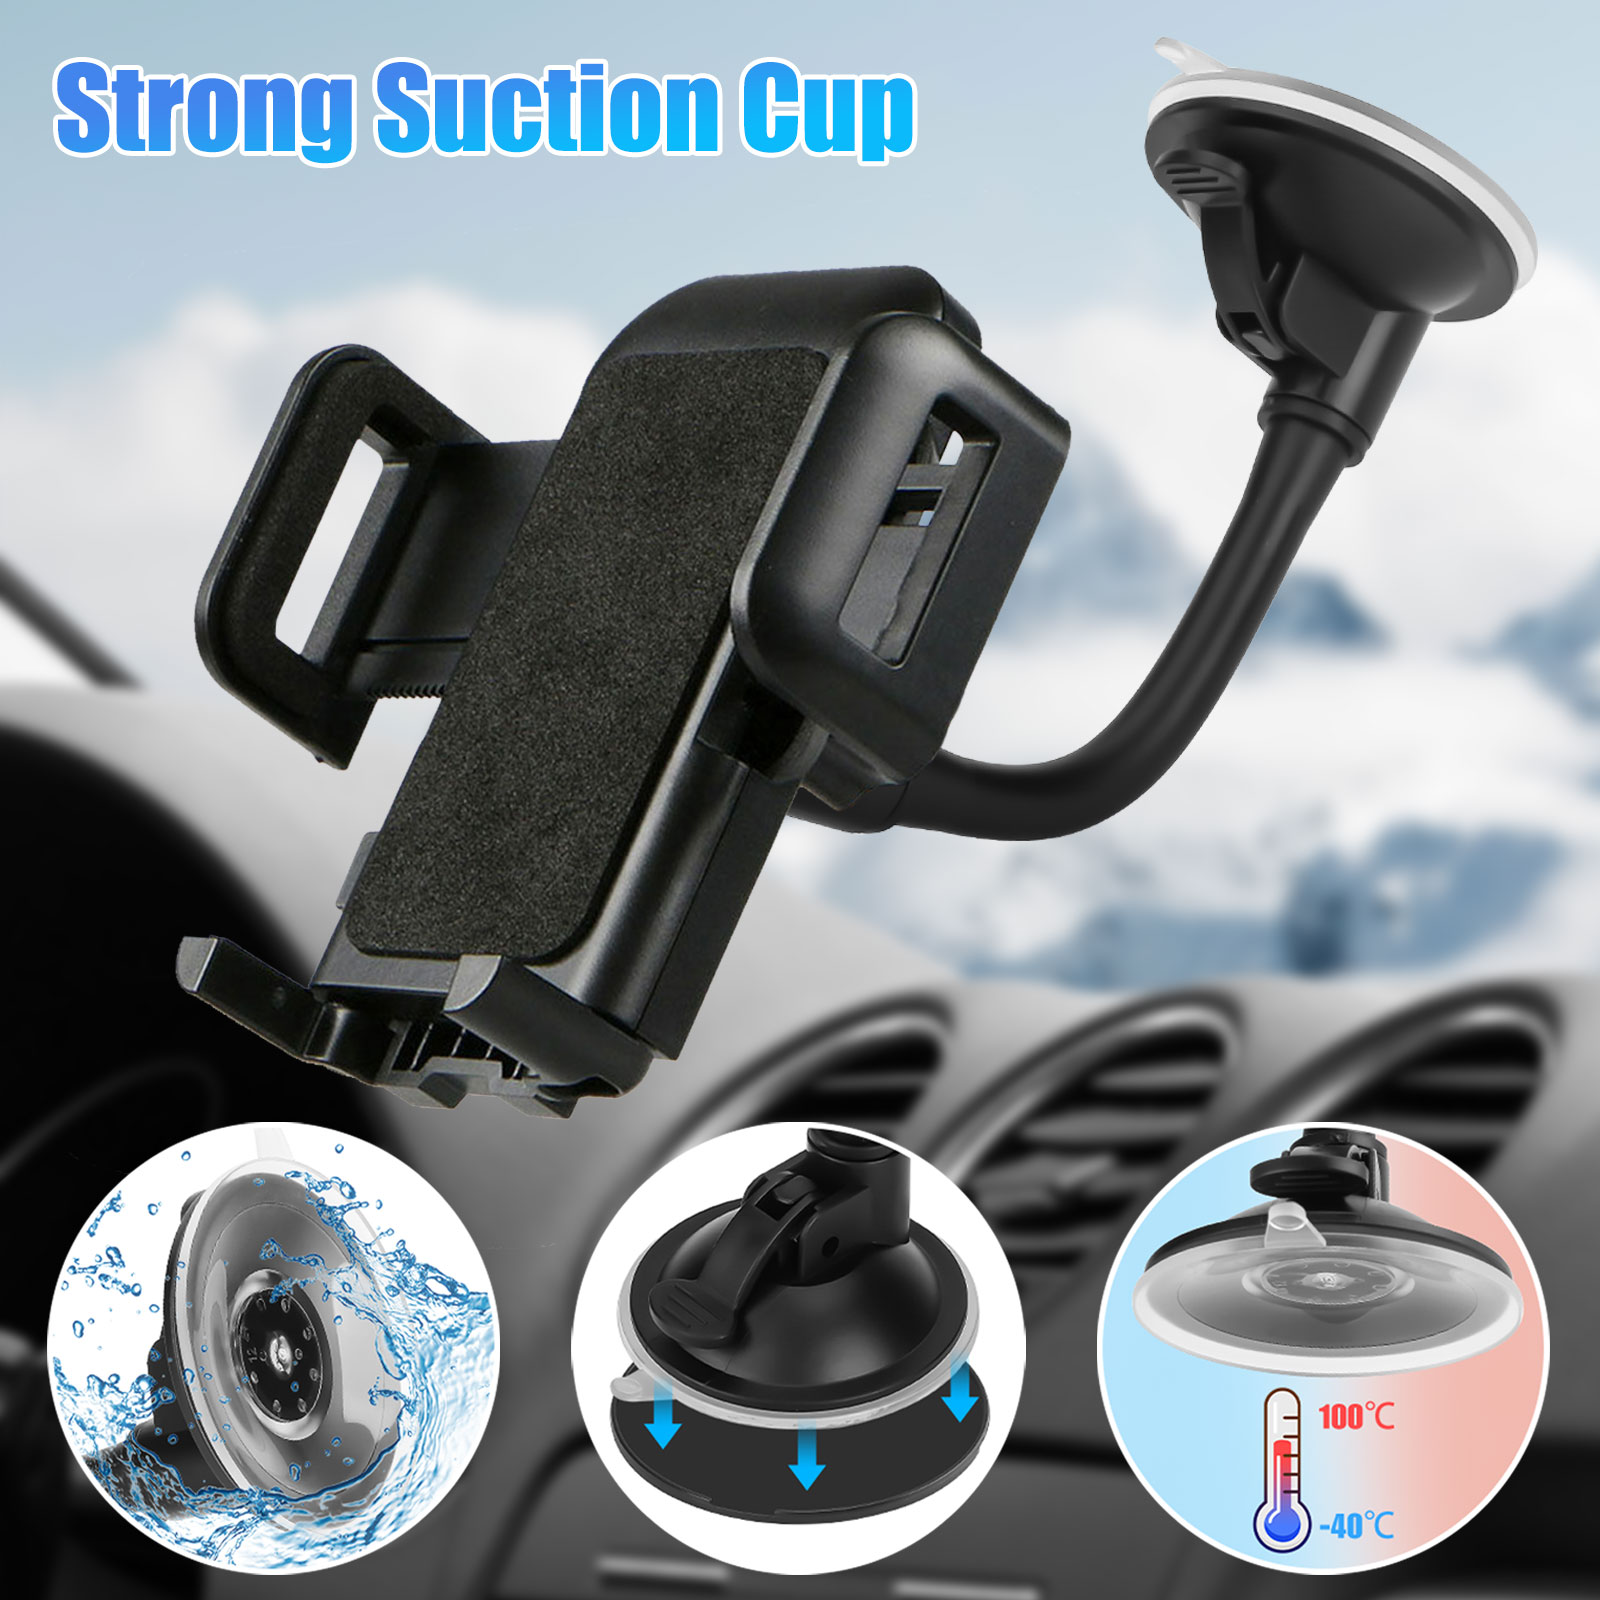 TSV Universal Car Windshield Dashboard Suction Cup 360 Degree Mount Holder Stand for Cellphones iPhone Android, Long Arm Car Phone Holder Windscreen Car Cradle - image 5 of 9